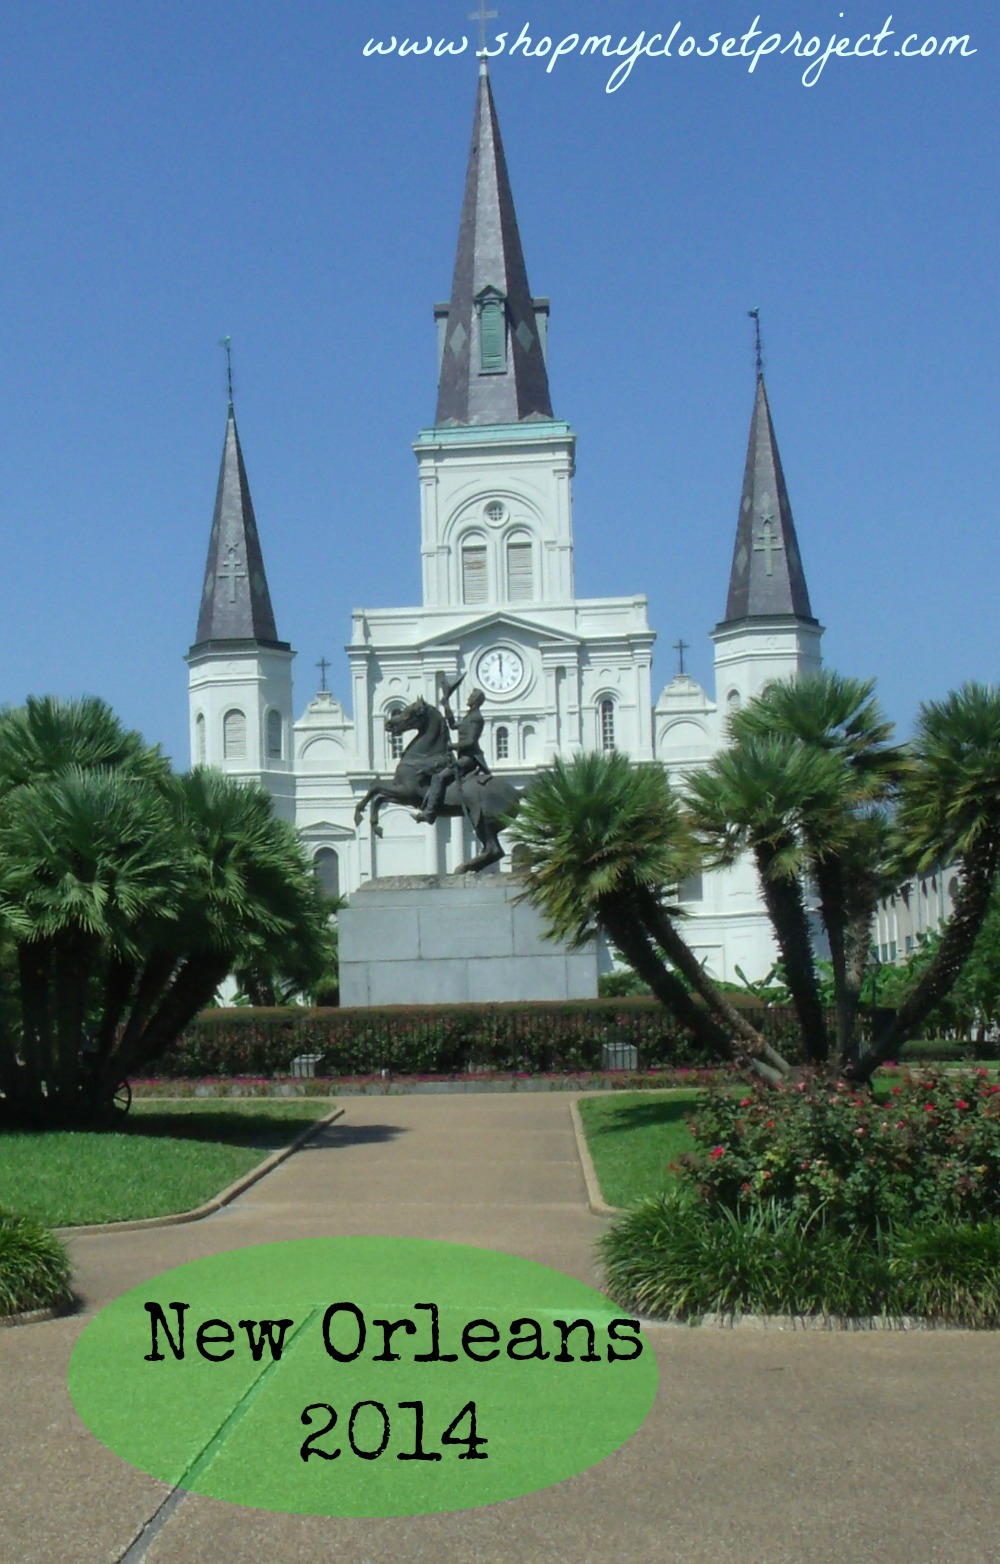 New Orleans, FinCon14, and Life On the Road